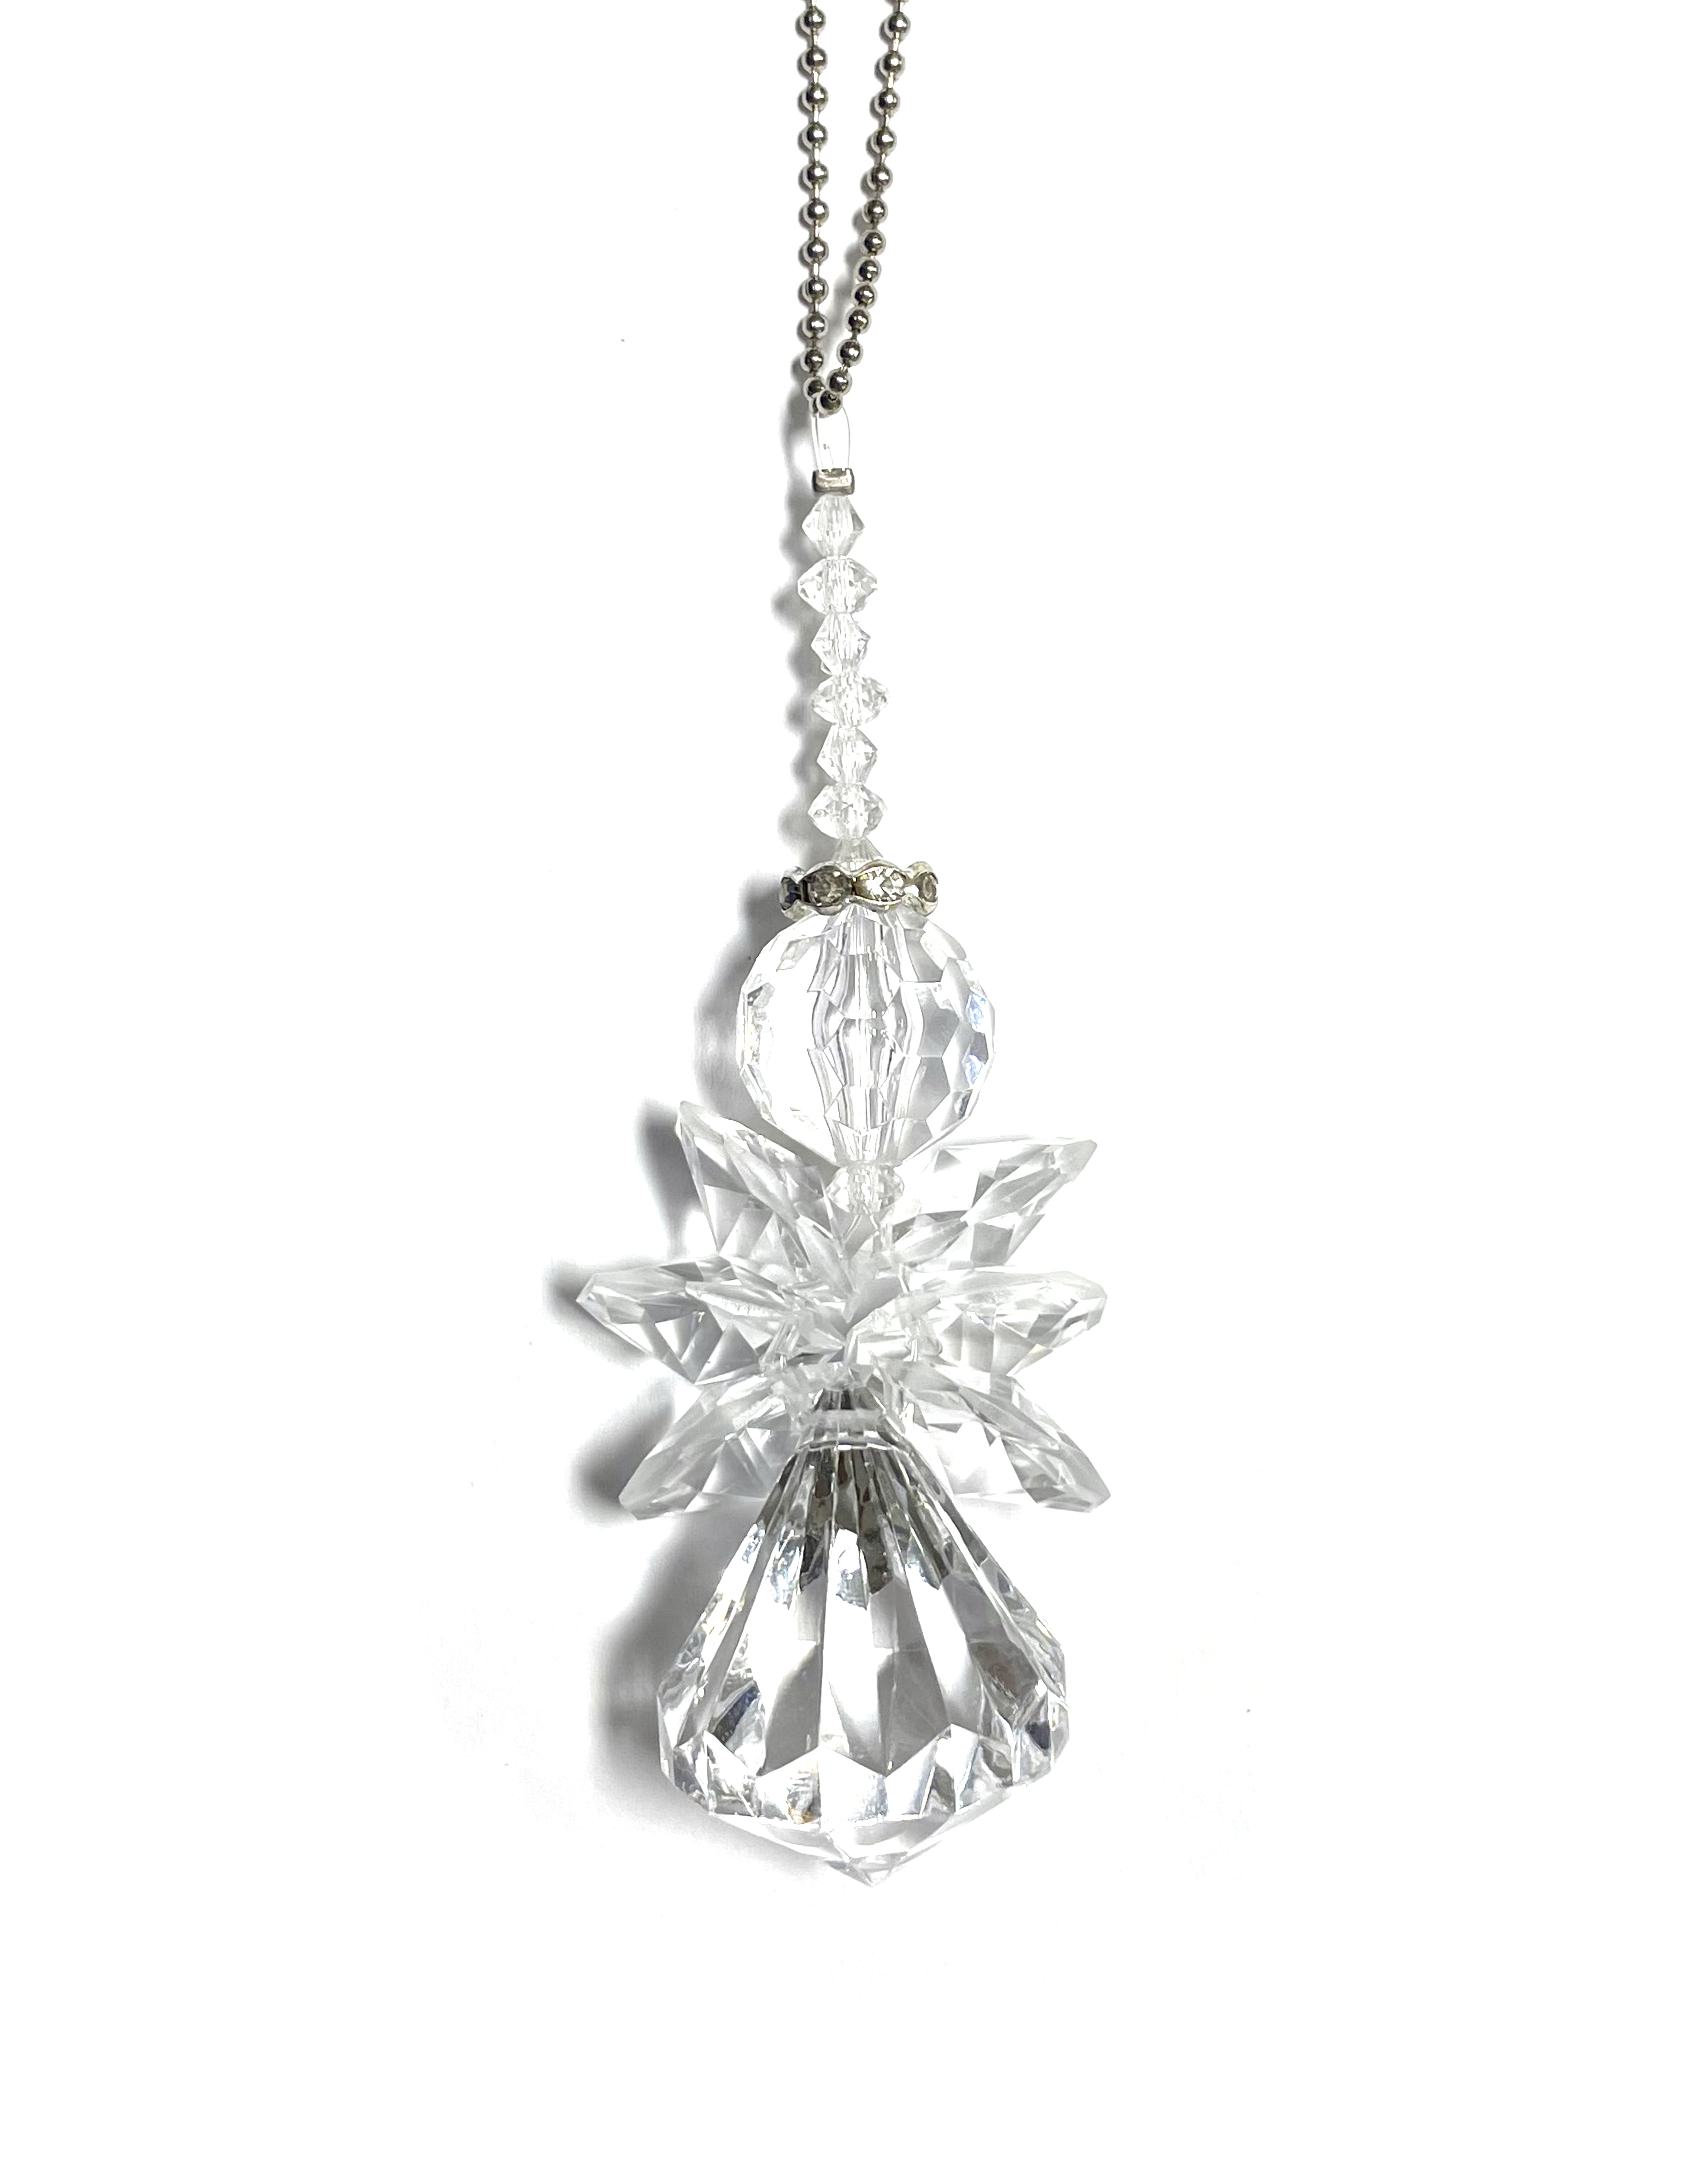 Hanging crystal angel, this is a special accessory to accompany you in your car made in a variety of colors